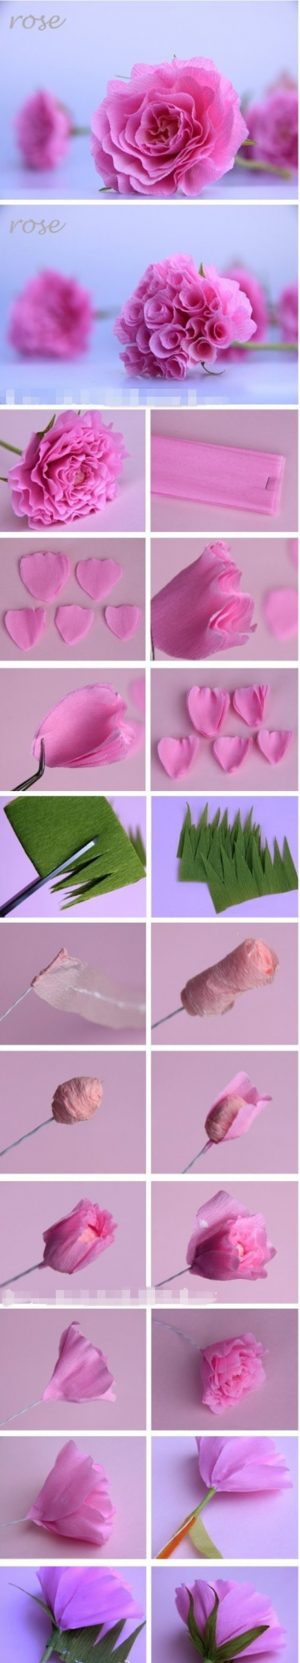 How To Make Flowers With Origami Sparkle 36 How To Make Origami Flowers Pumpernickel Pixie